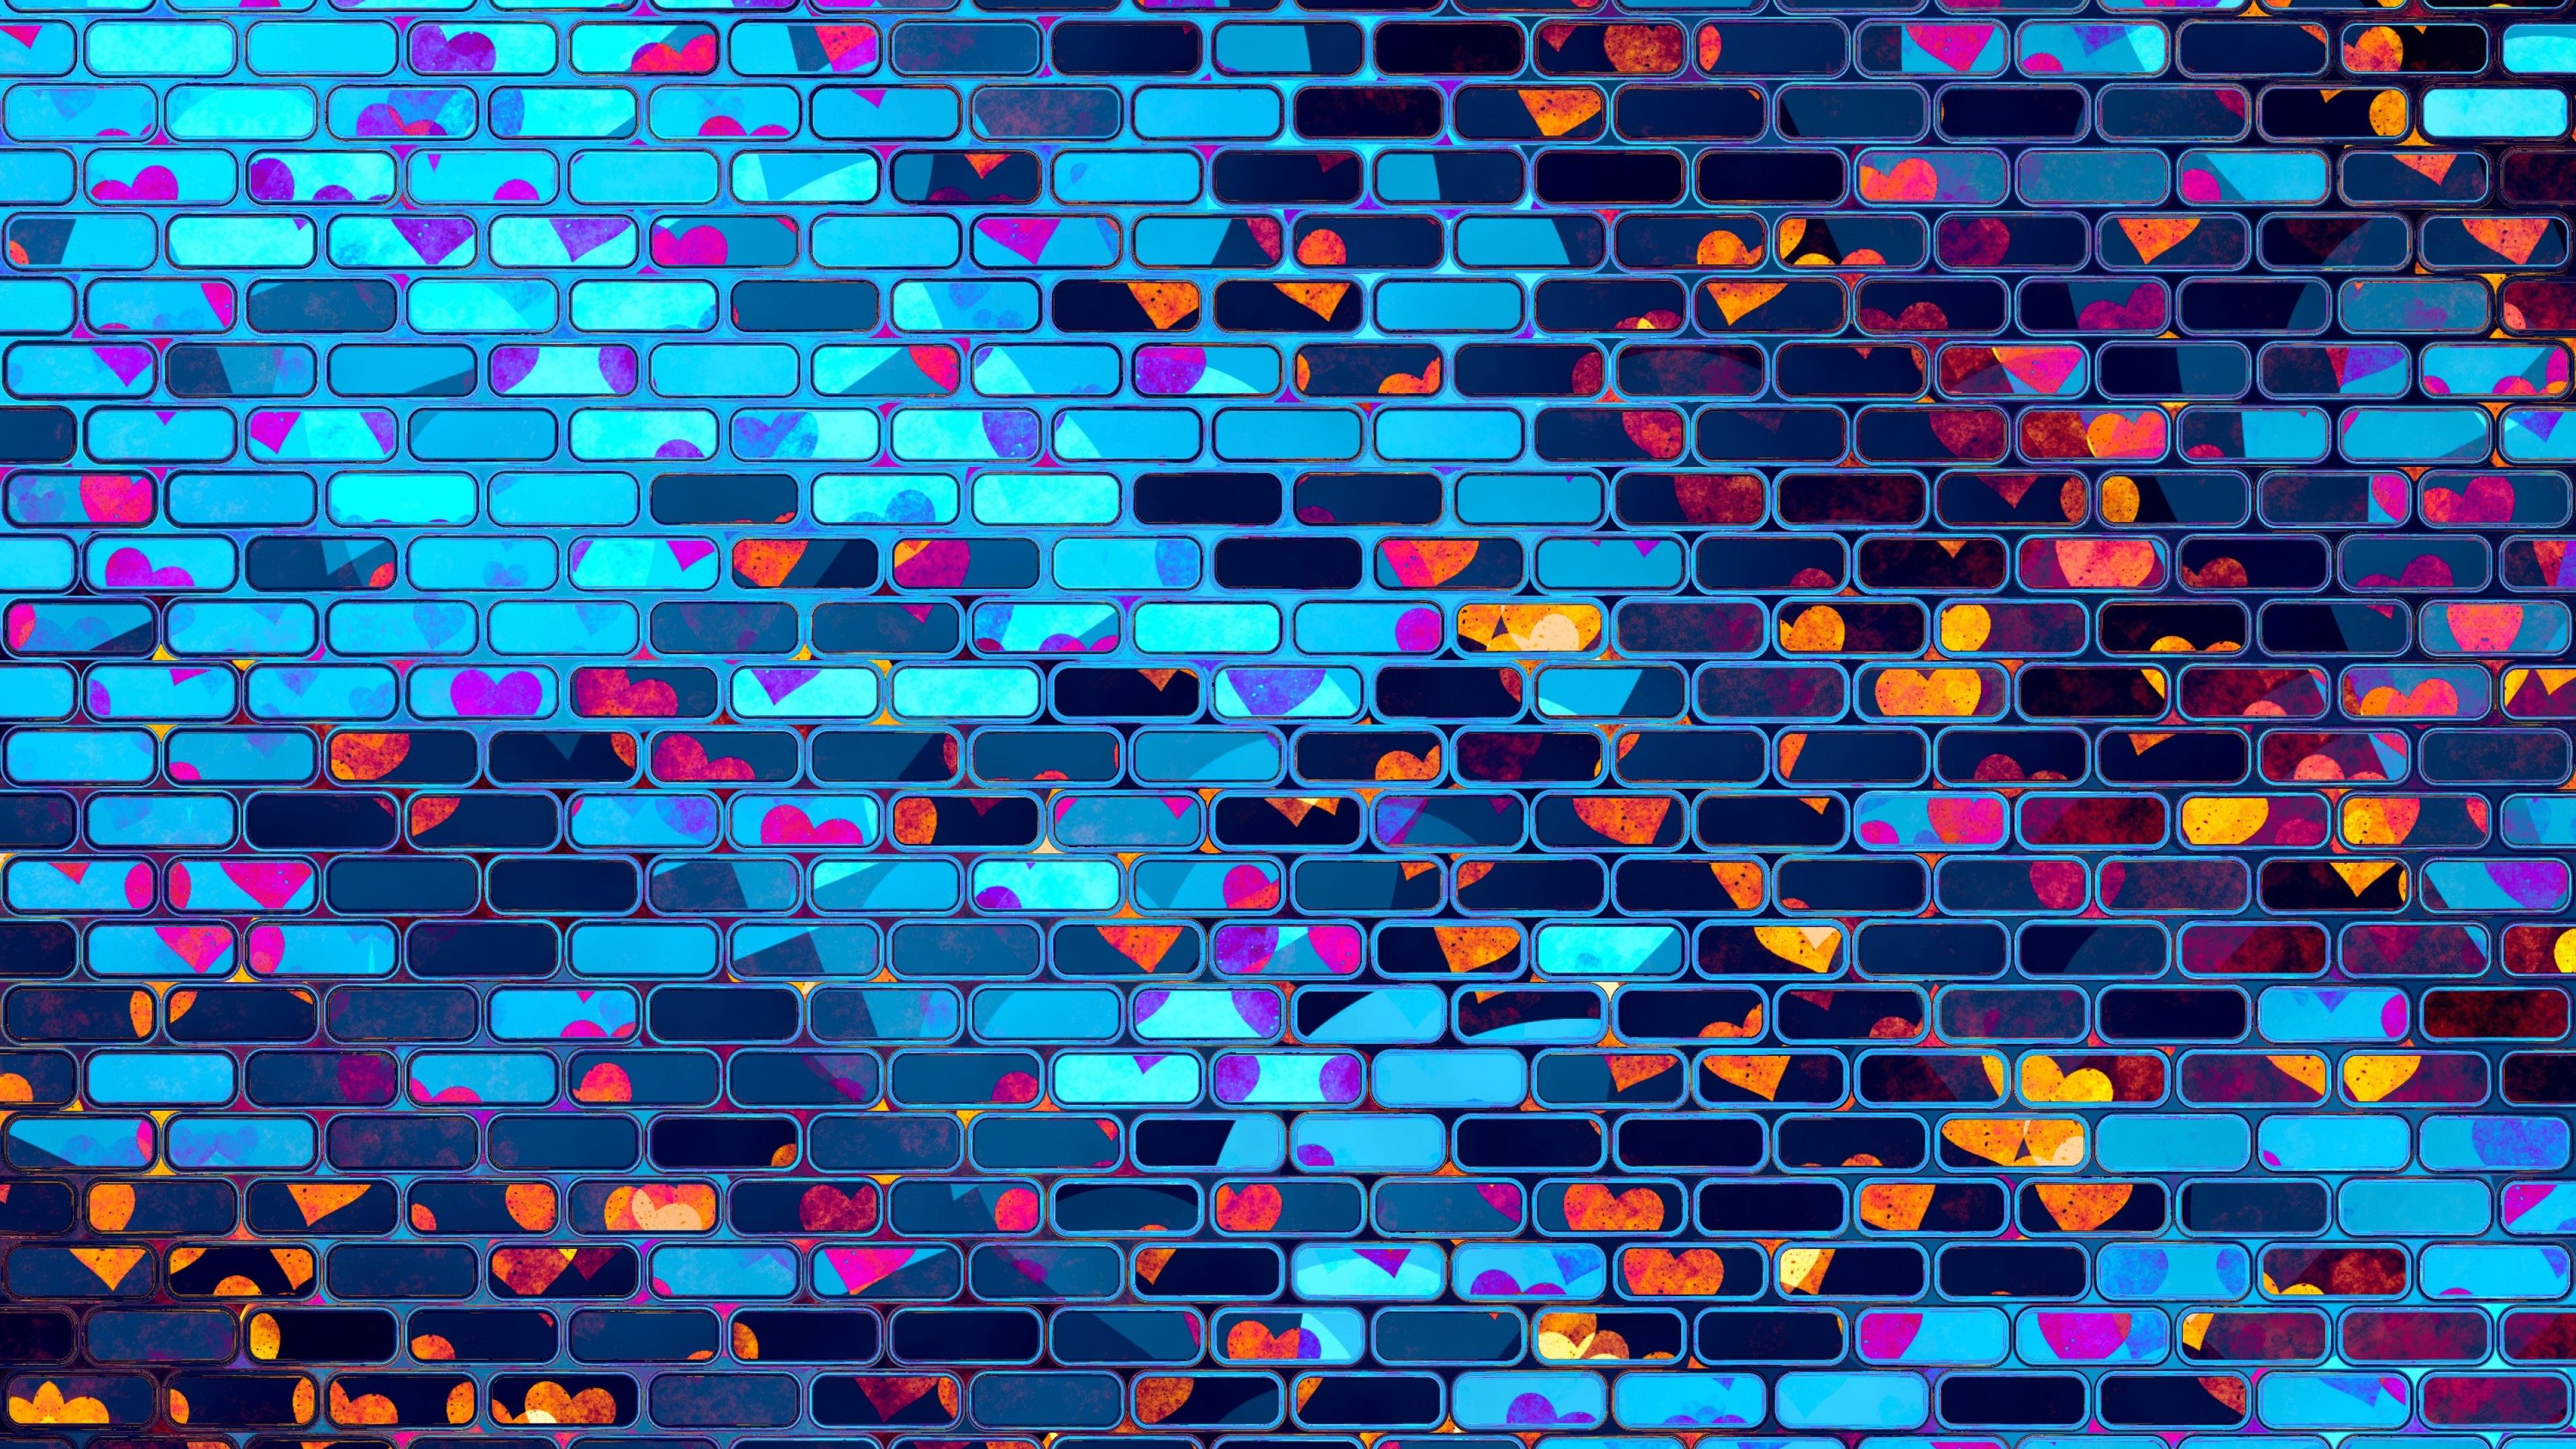 Wallpaper Bricks, Neon, Love hearts, Pattern, HD, Abstract,. Wallpaper for iPhone, Android, Mobile and Desktop